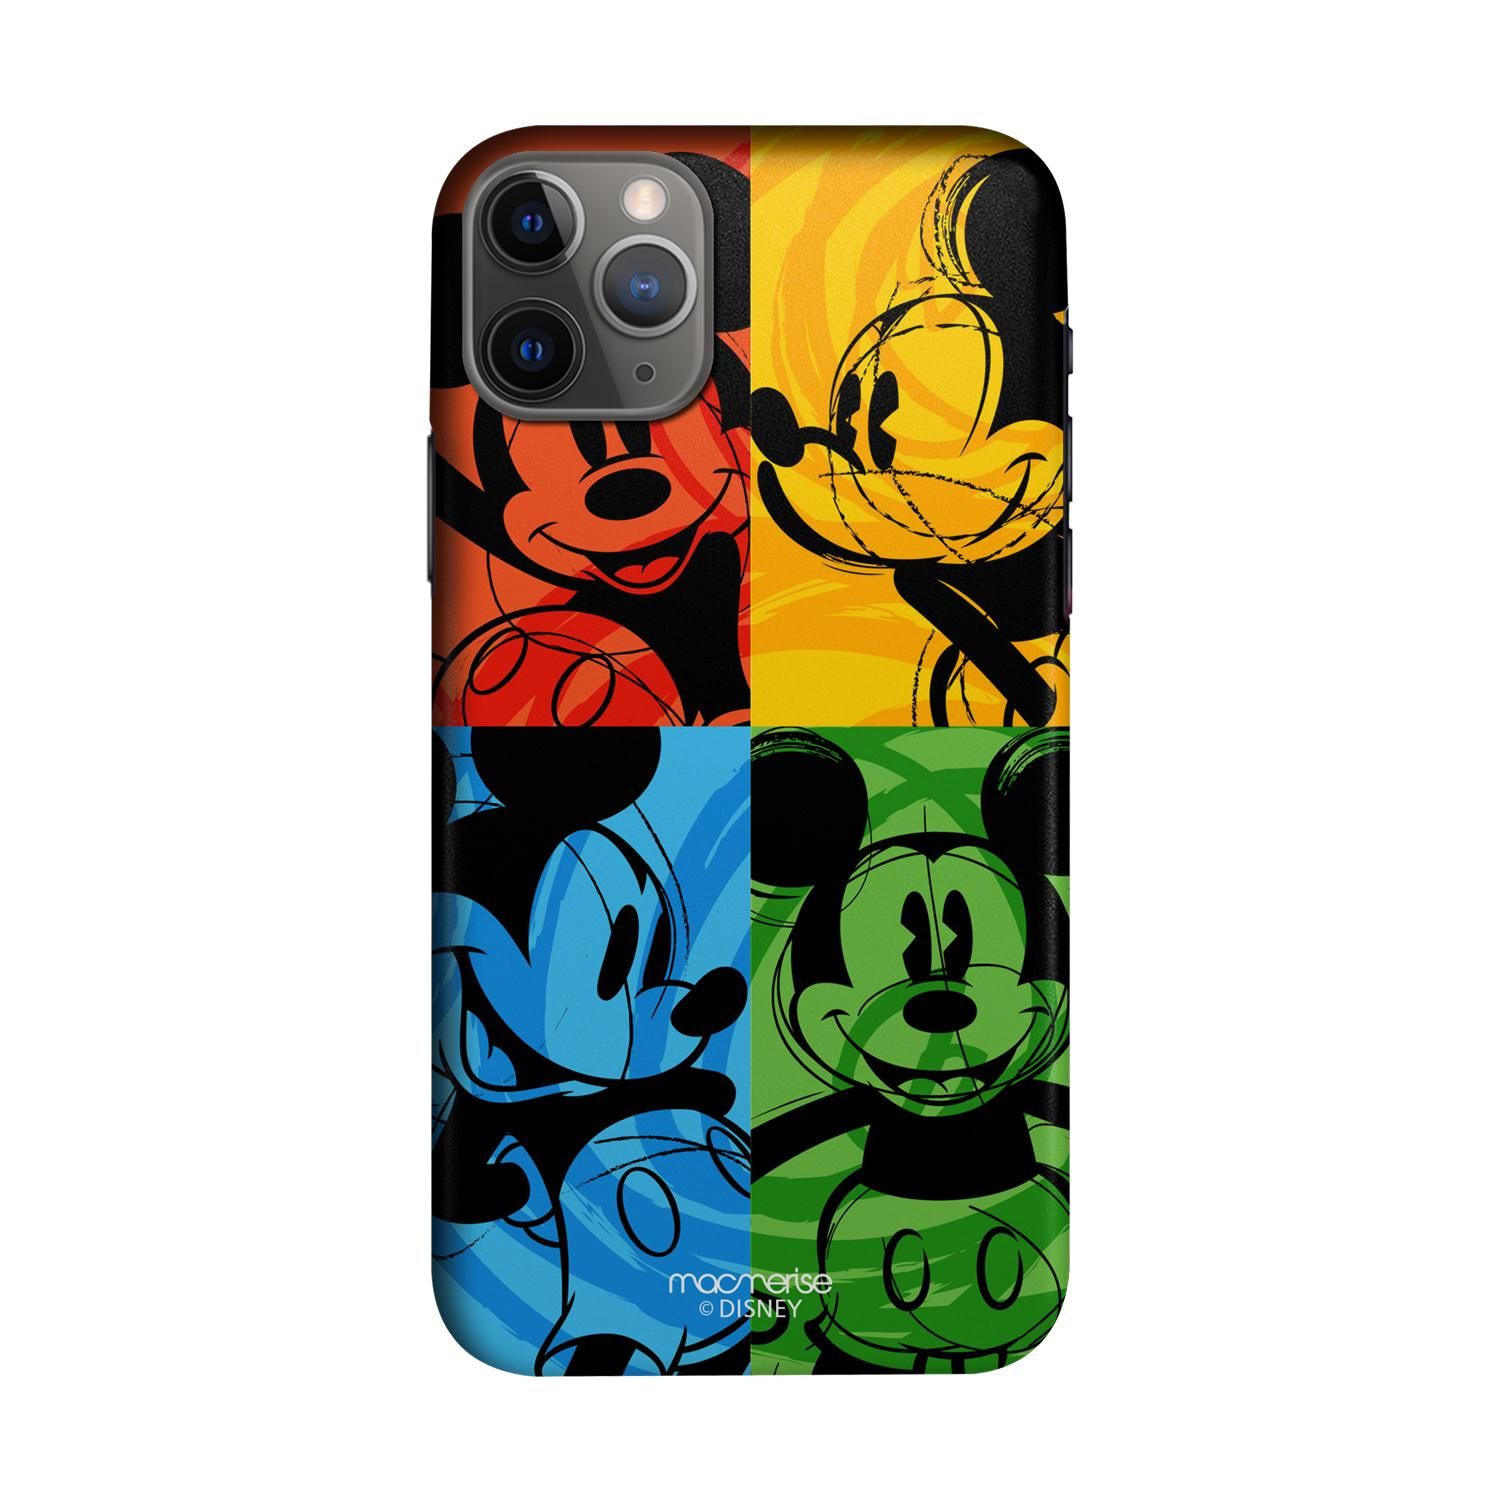 Buy Shades of Mickey - Sleek Phone Case for iPhone 11 Pro Online